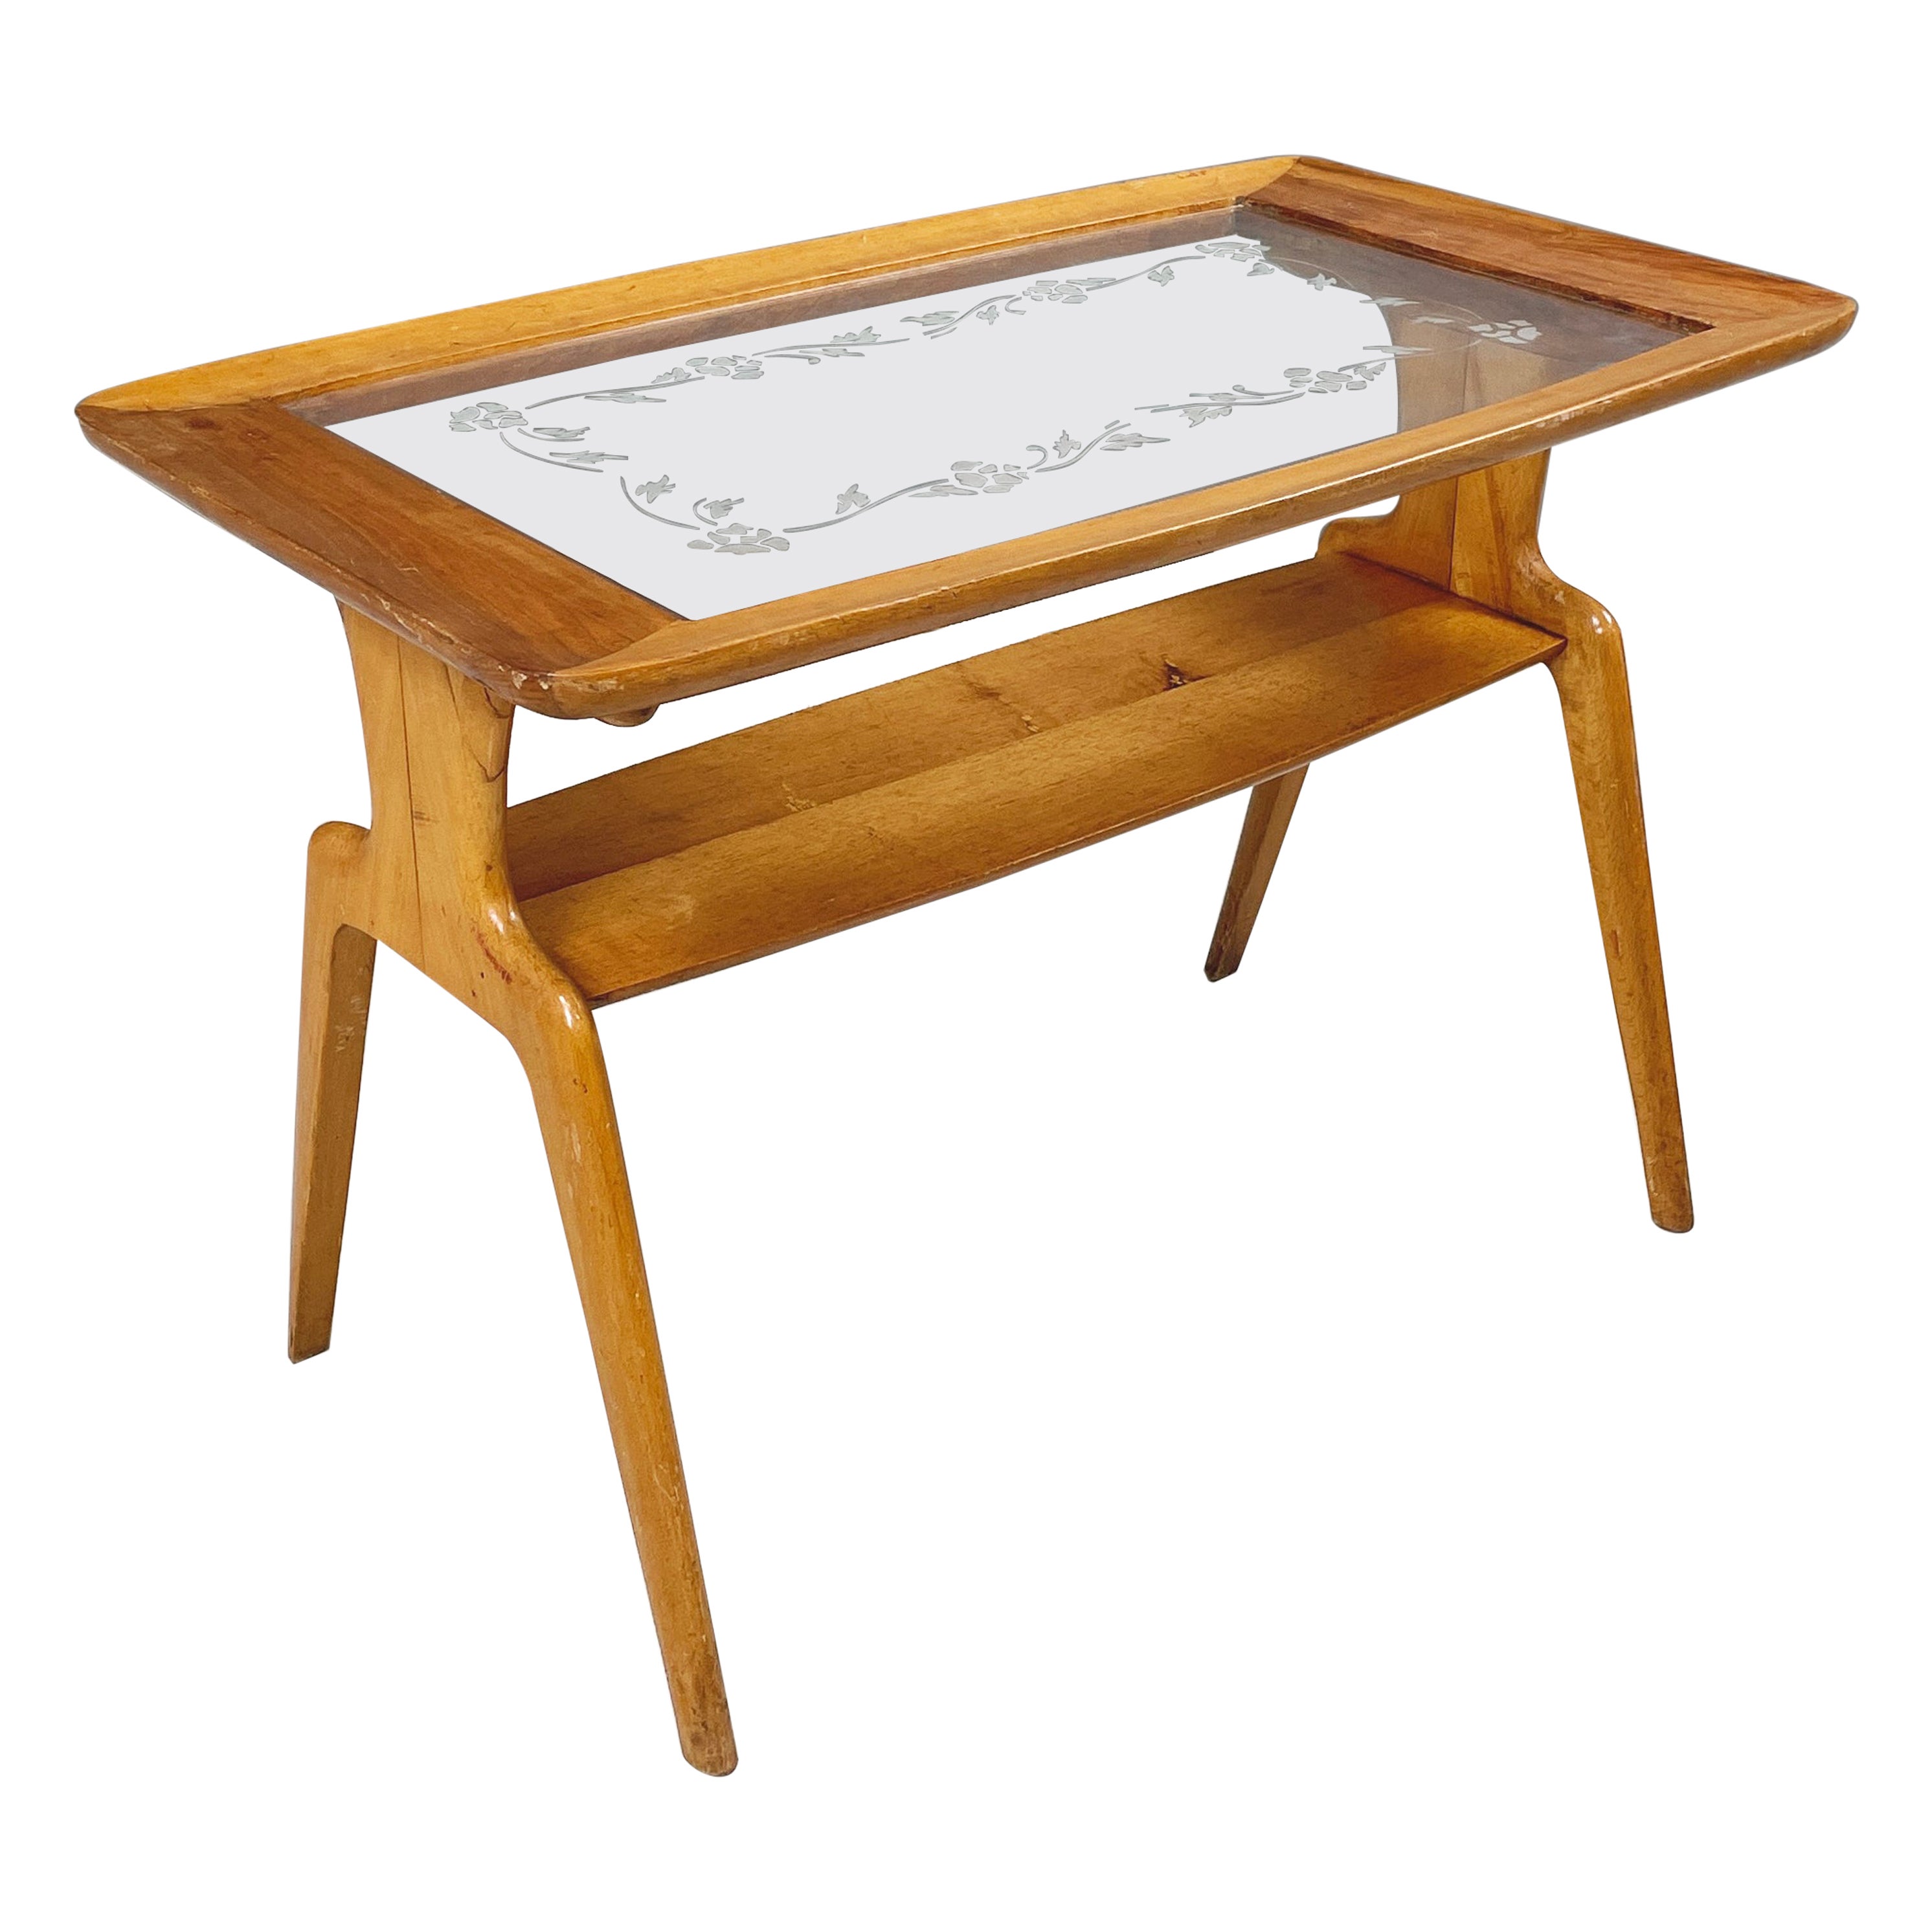 Italian mid-century modern Coffee table in wood and decorated glass, 1950s